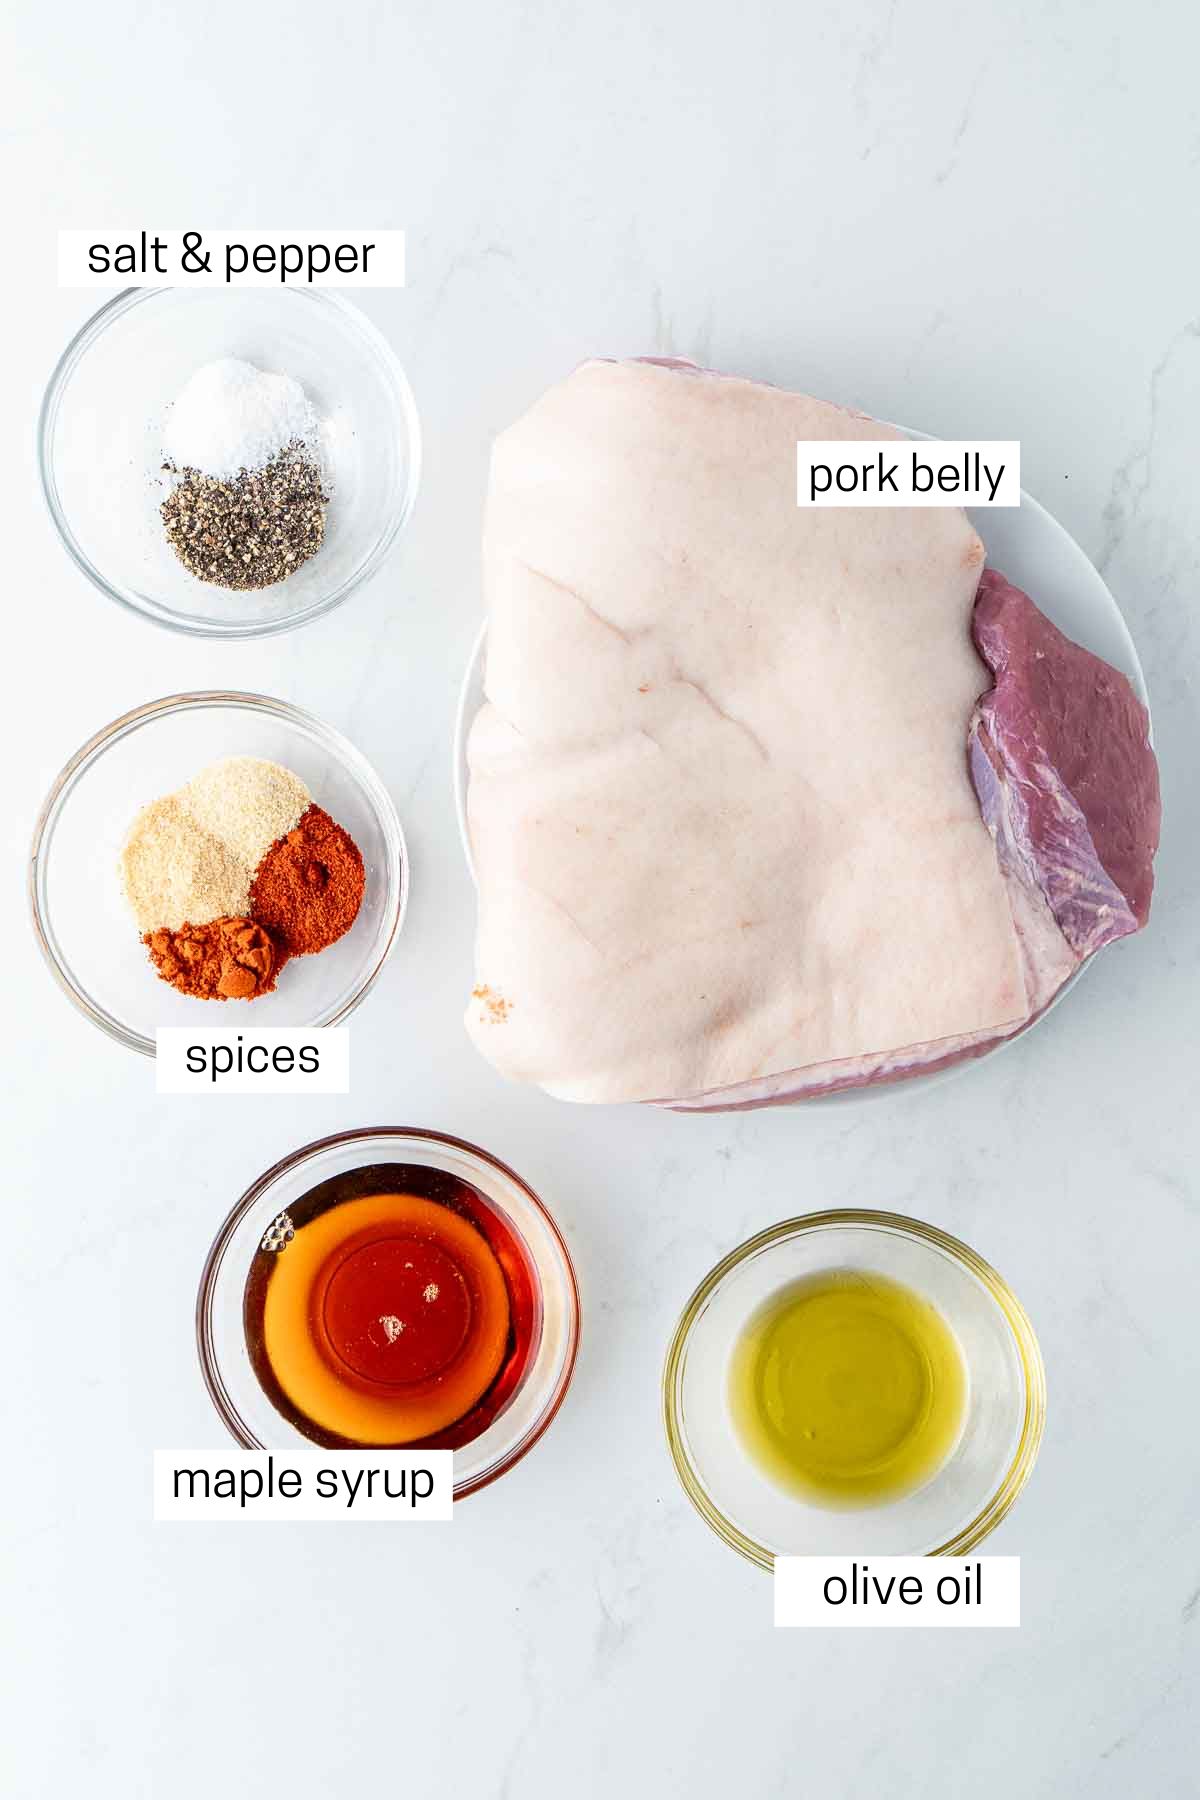 All ingredients needed for pork belly bites laid out in bowls.